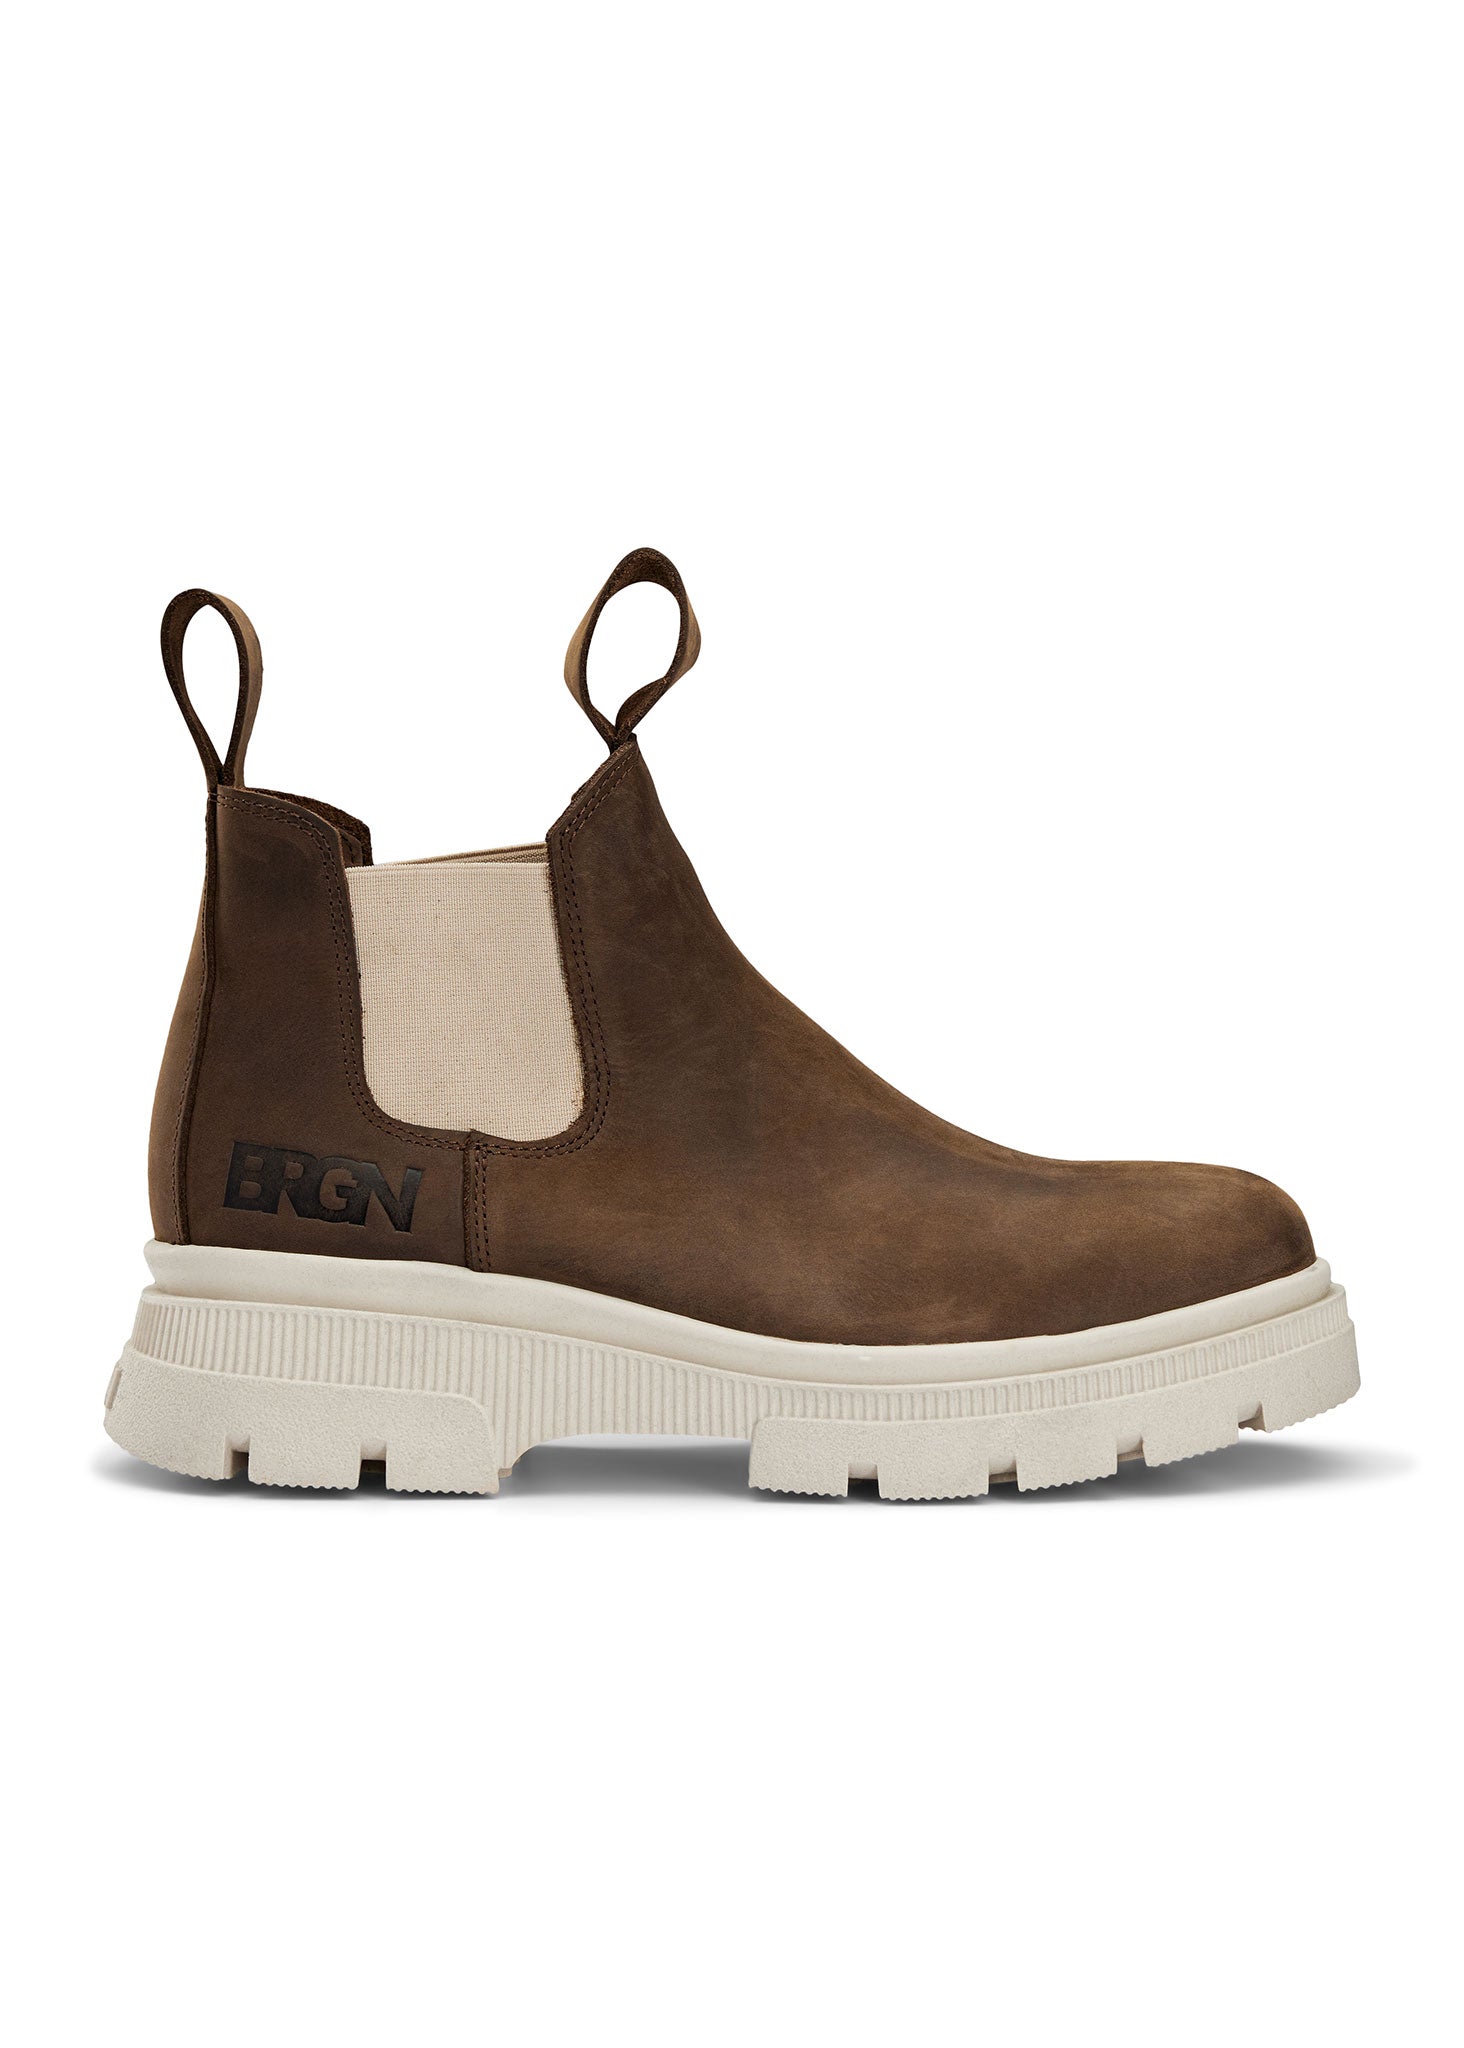 BRGN Low Chelsea Boot Shoes 187 Chocolate Brown / 135 Sand